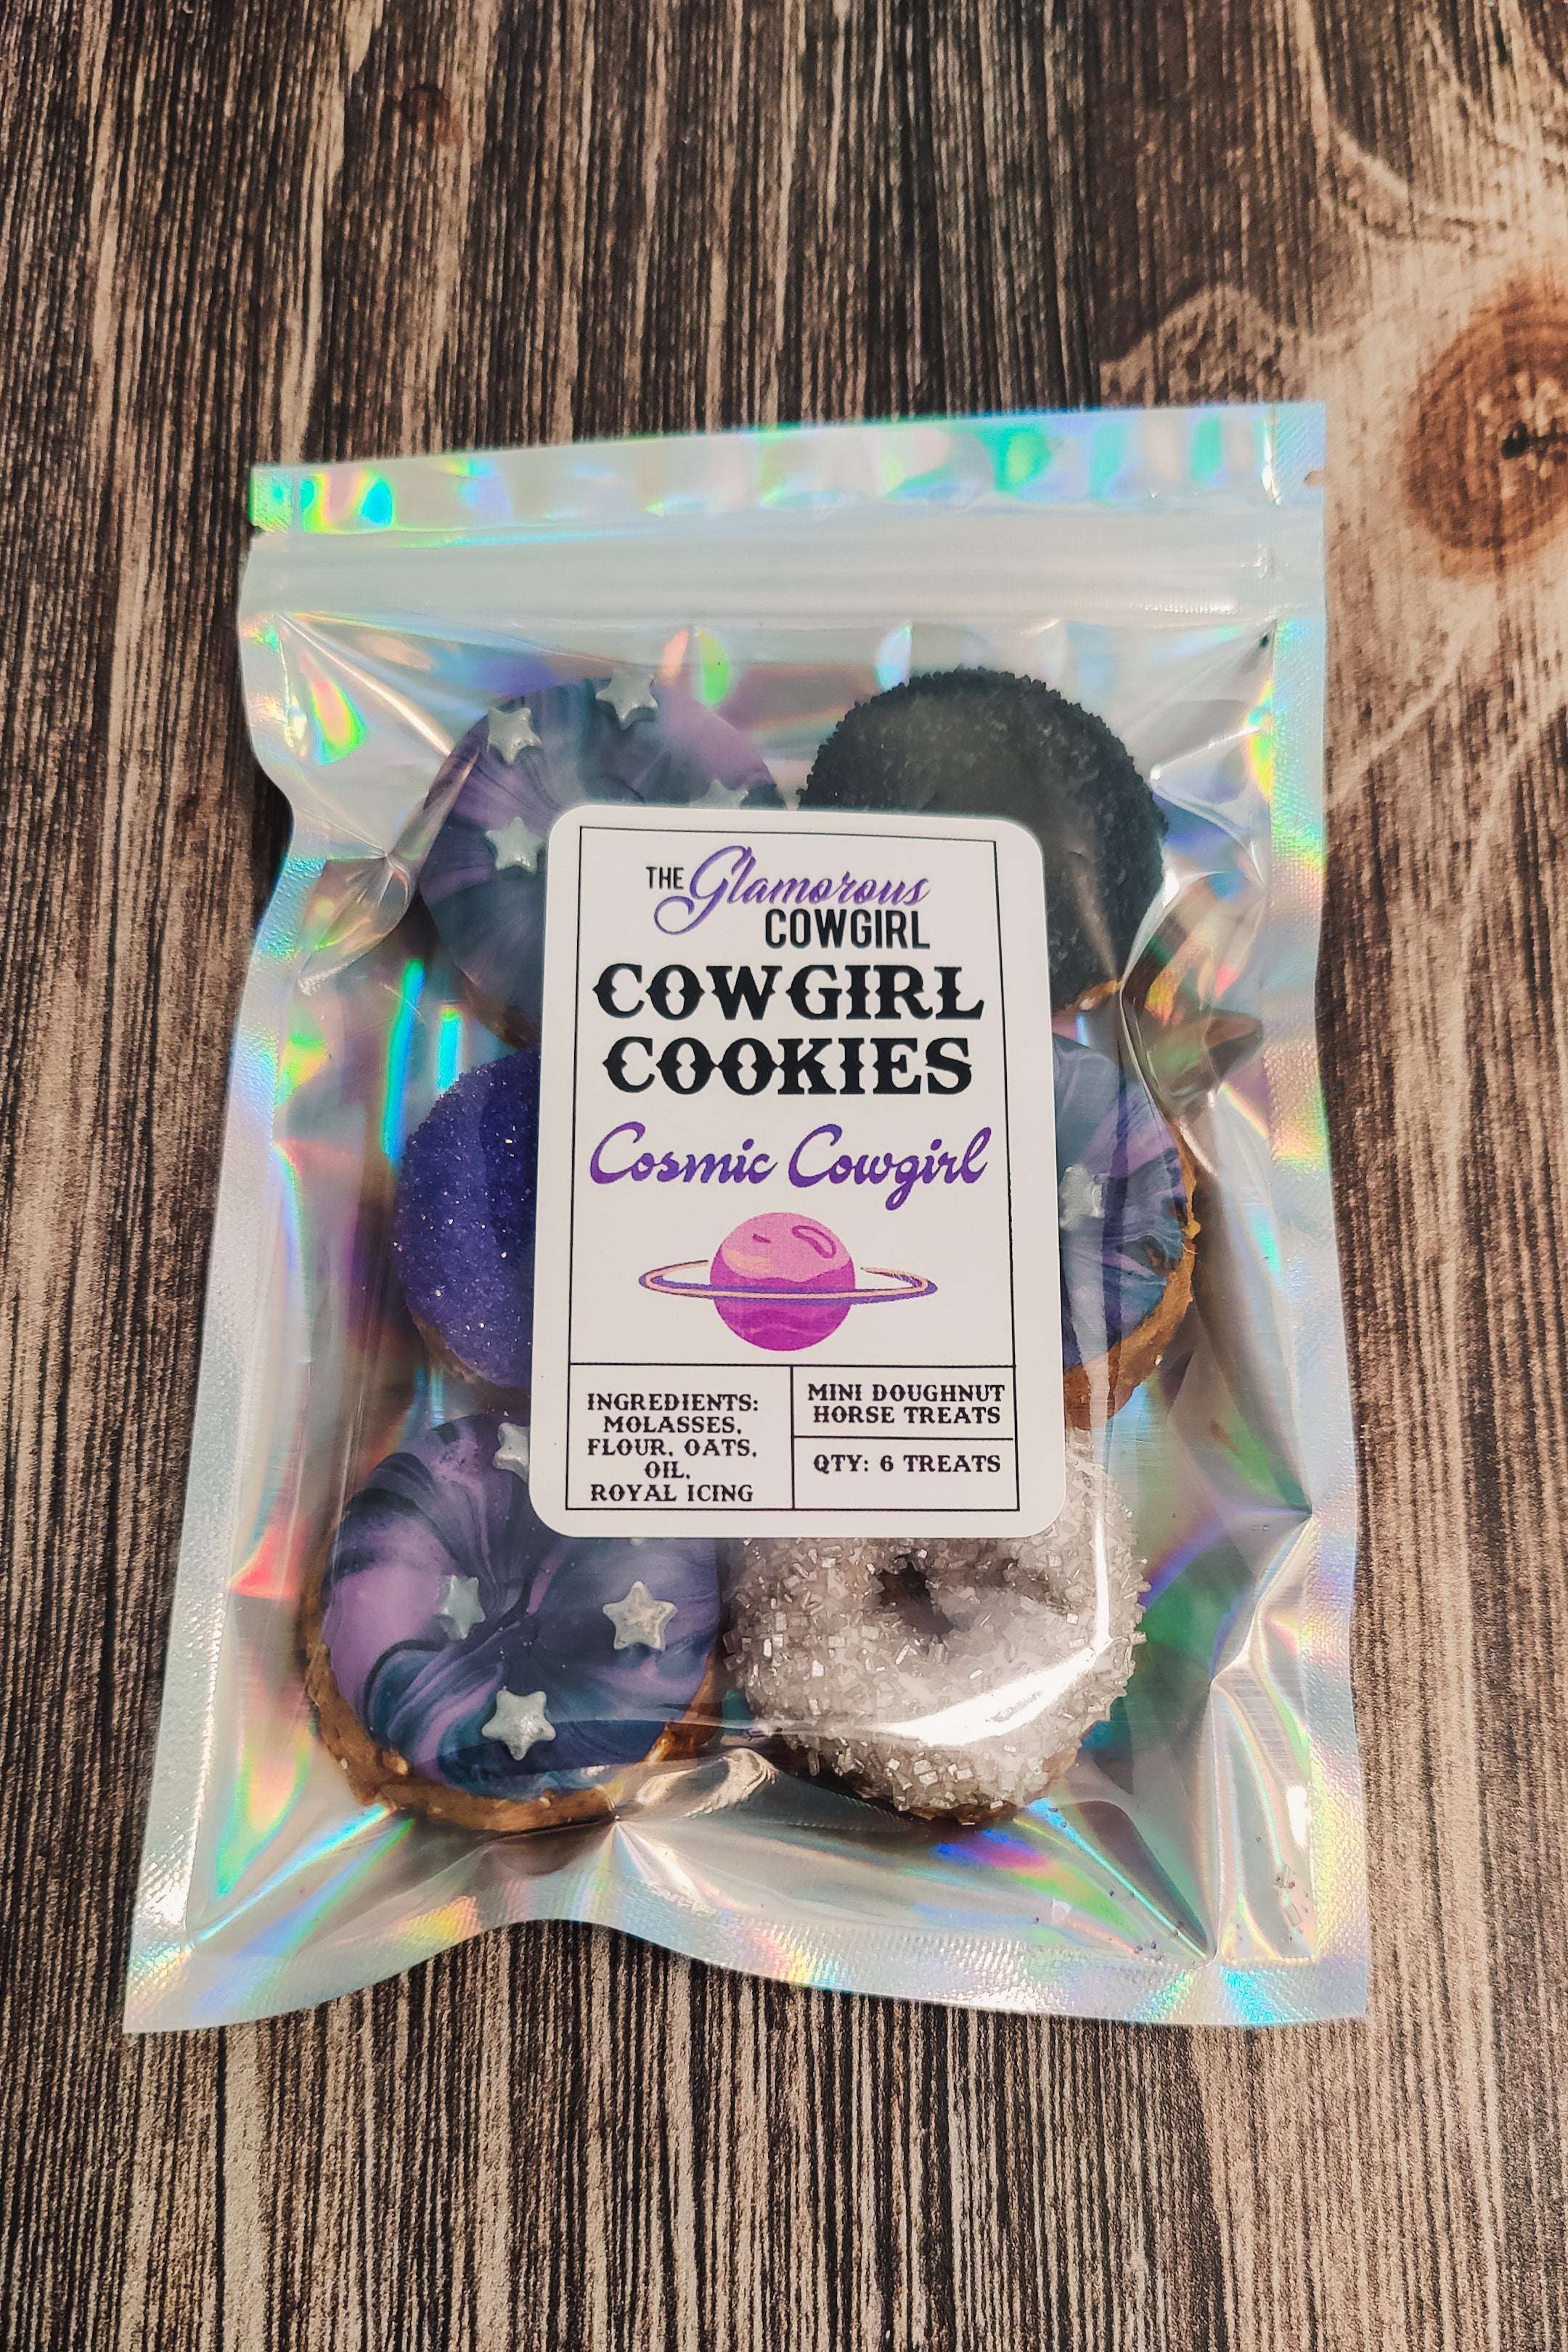 Cosmic Cowgirl Cookies Horse Treats - The Glamorous Cowgirl